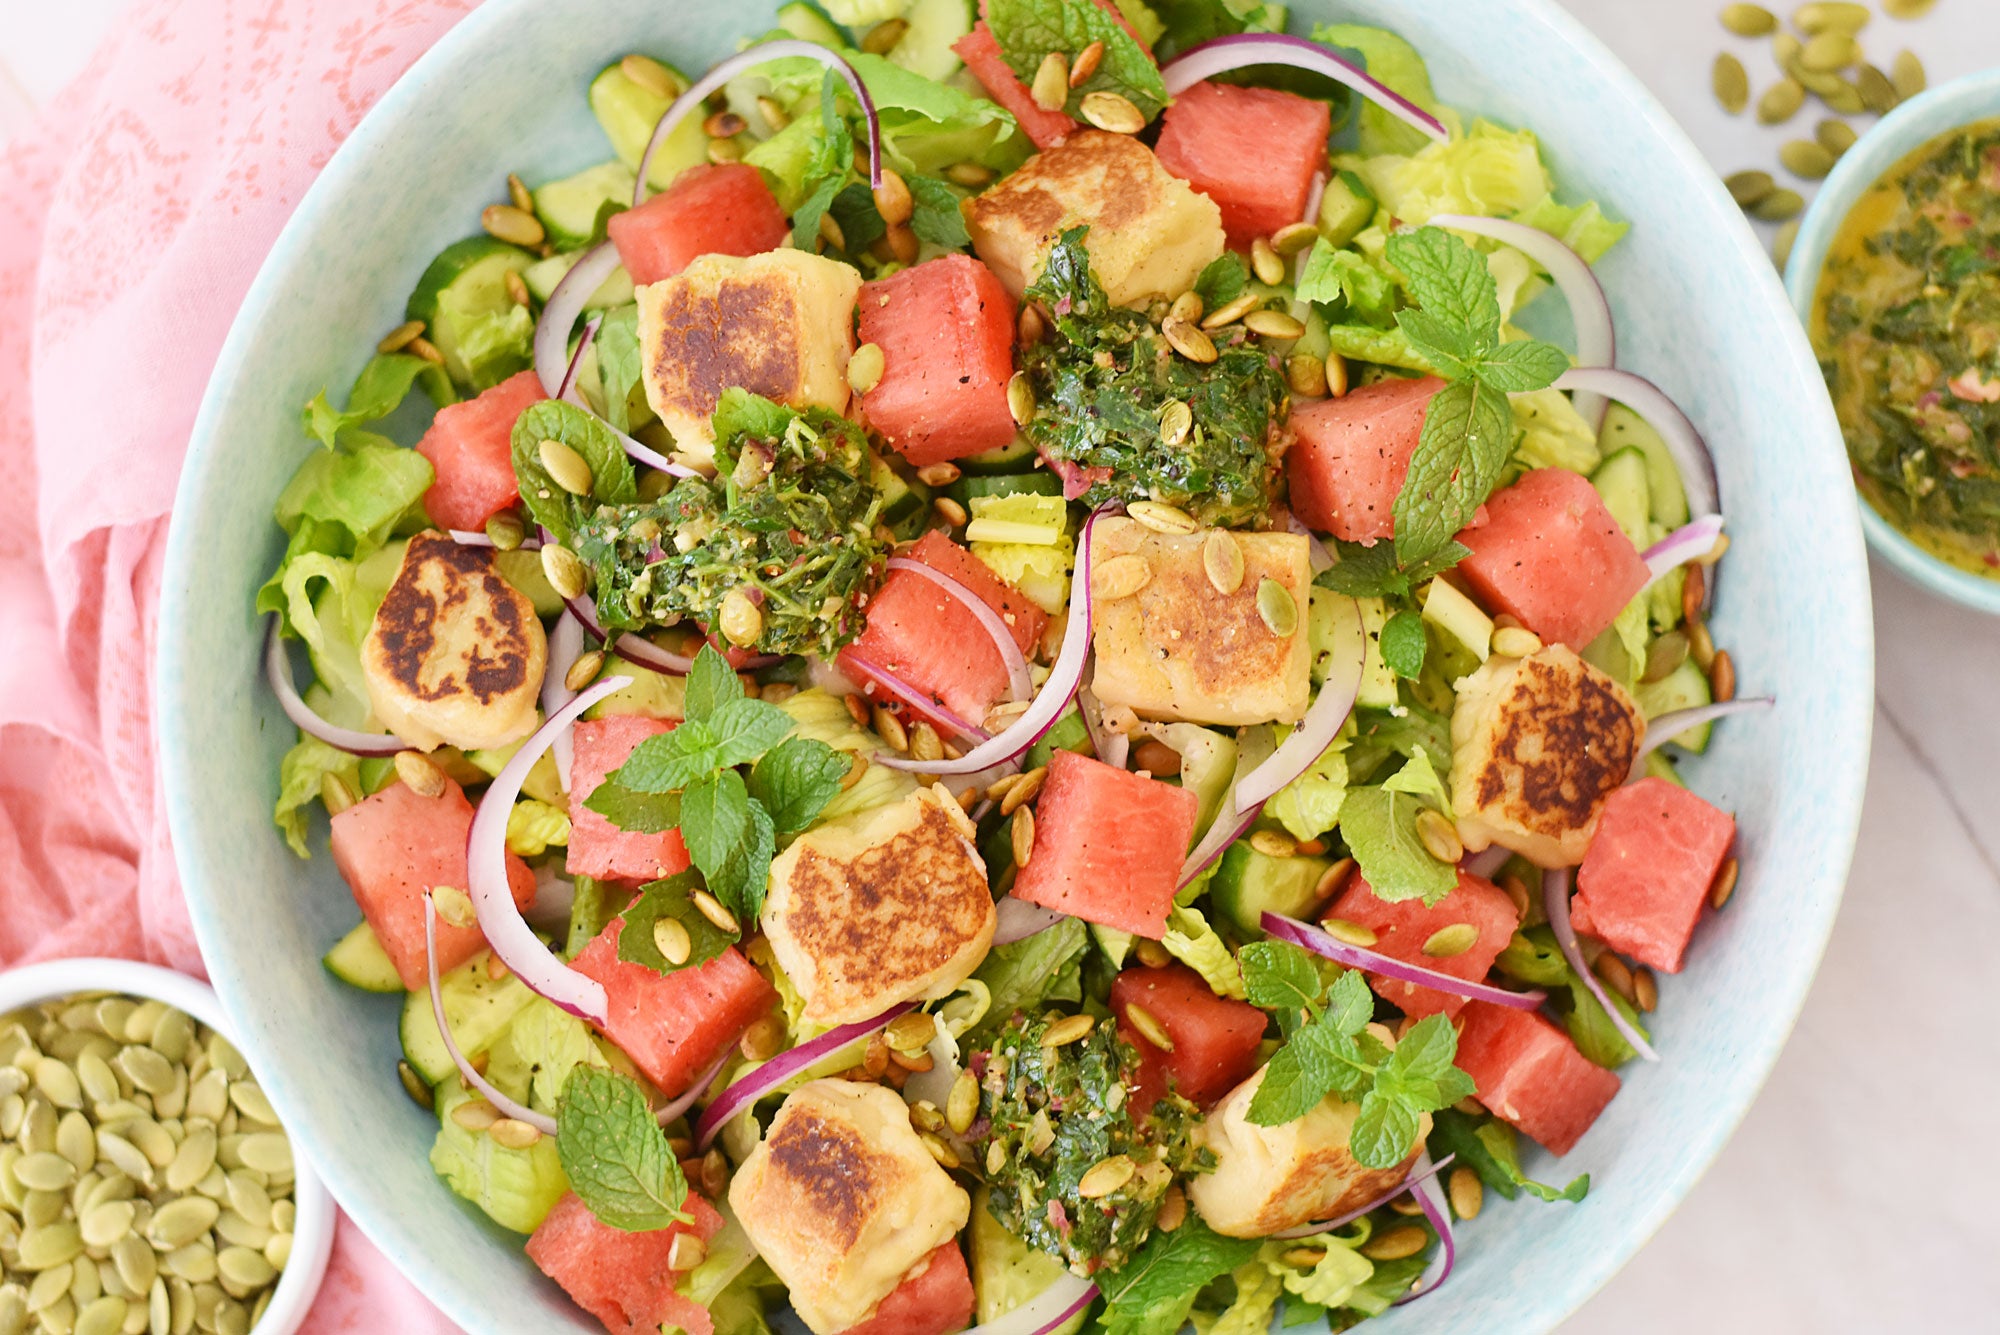 Watermelon and Vegan Cheese Salad with Garlic-Herb Dressing